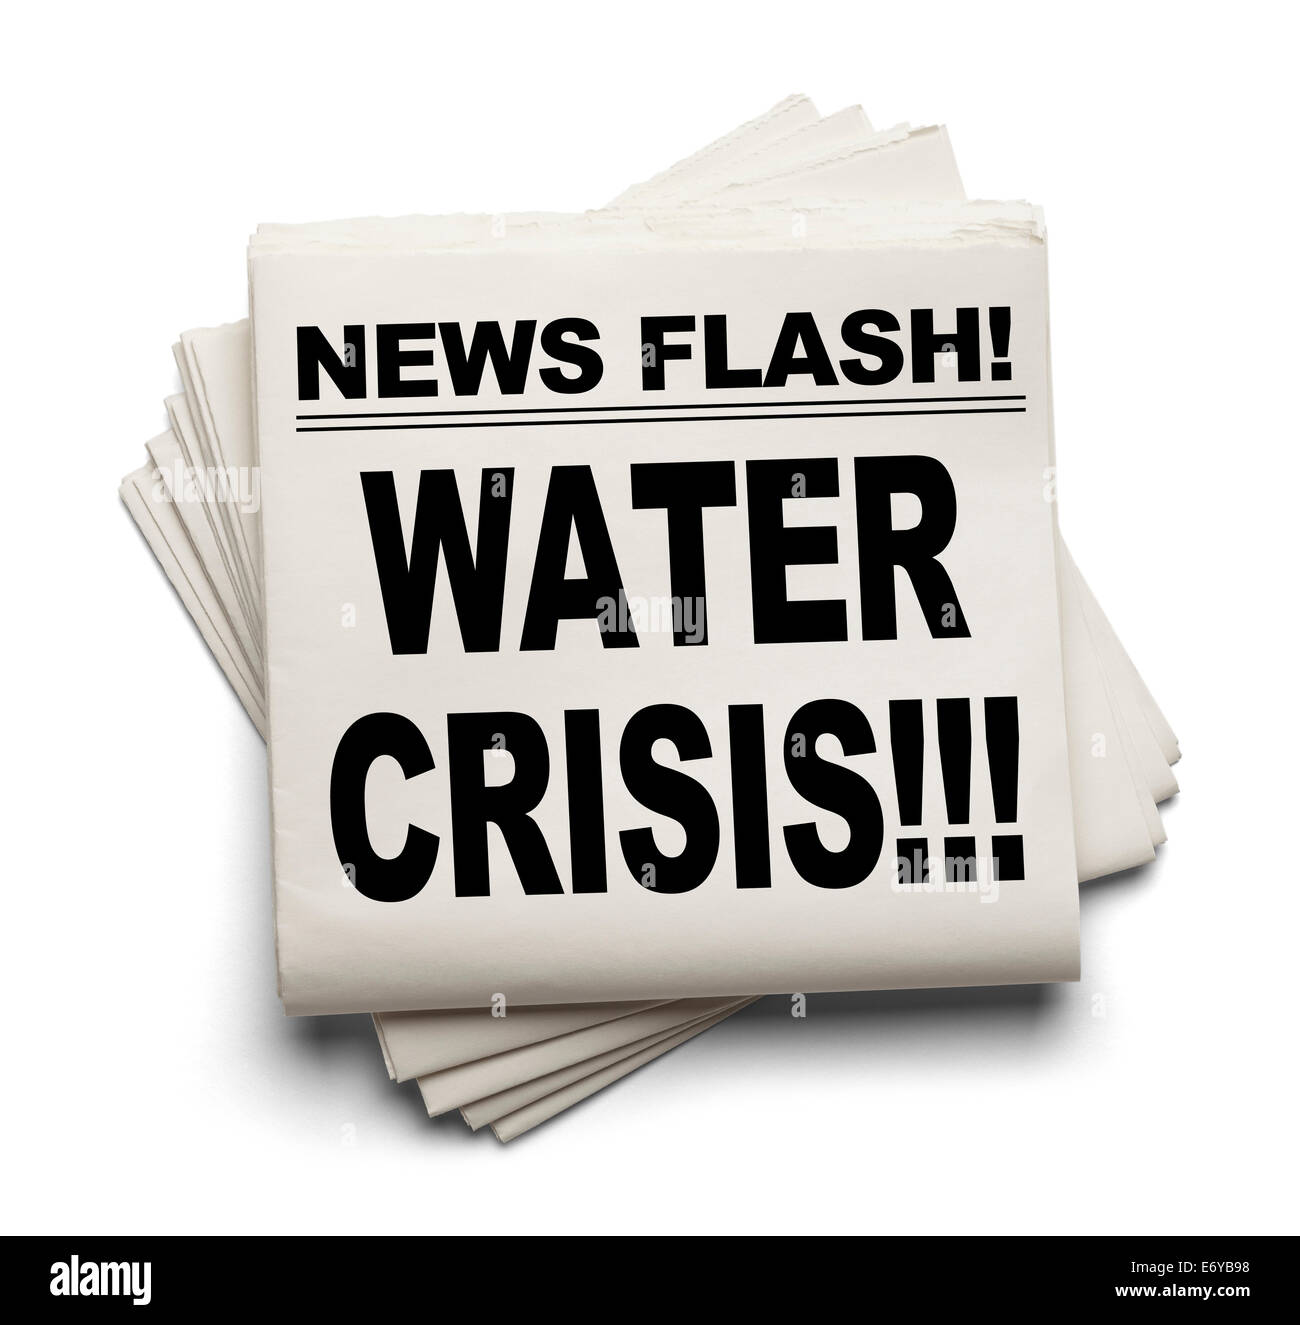 News Flash Water Crisis News Paper Isolated on White Background. Stock Photo